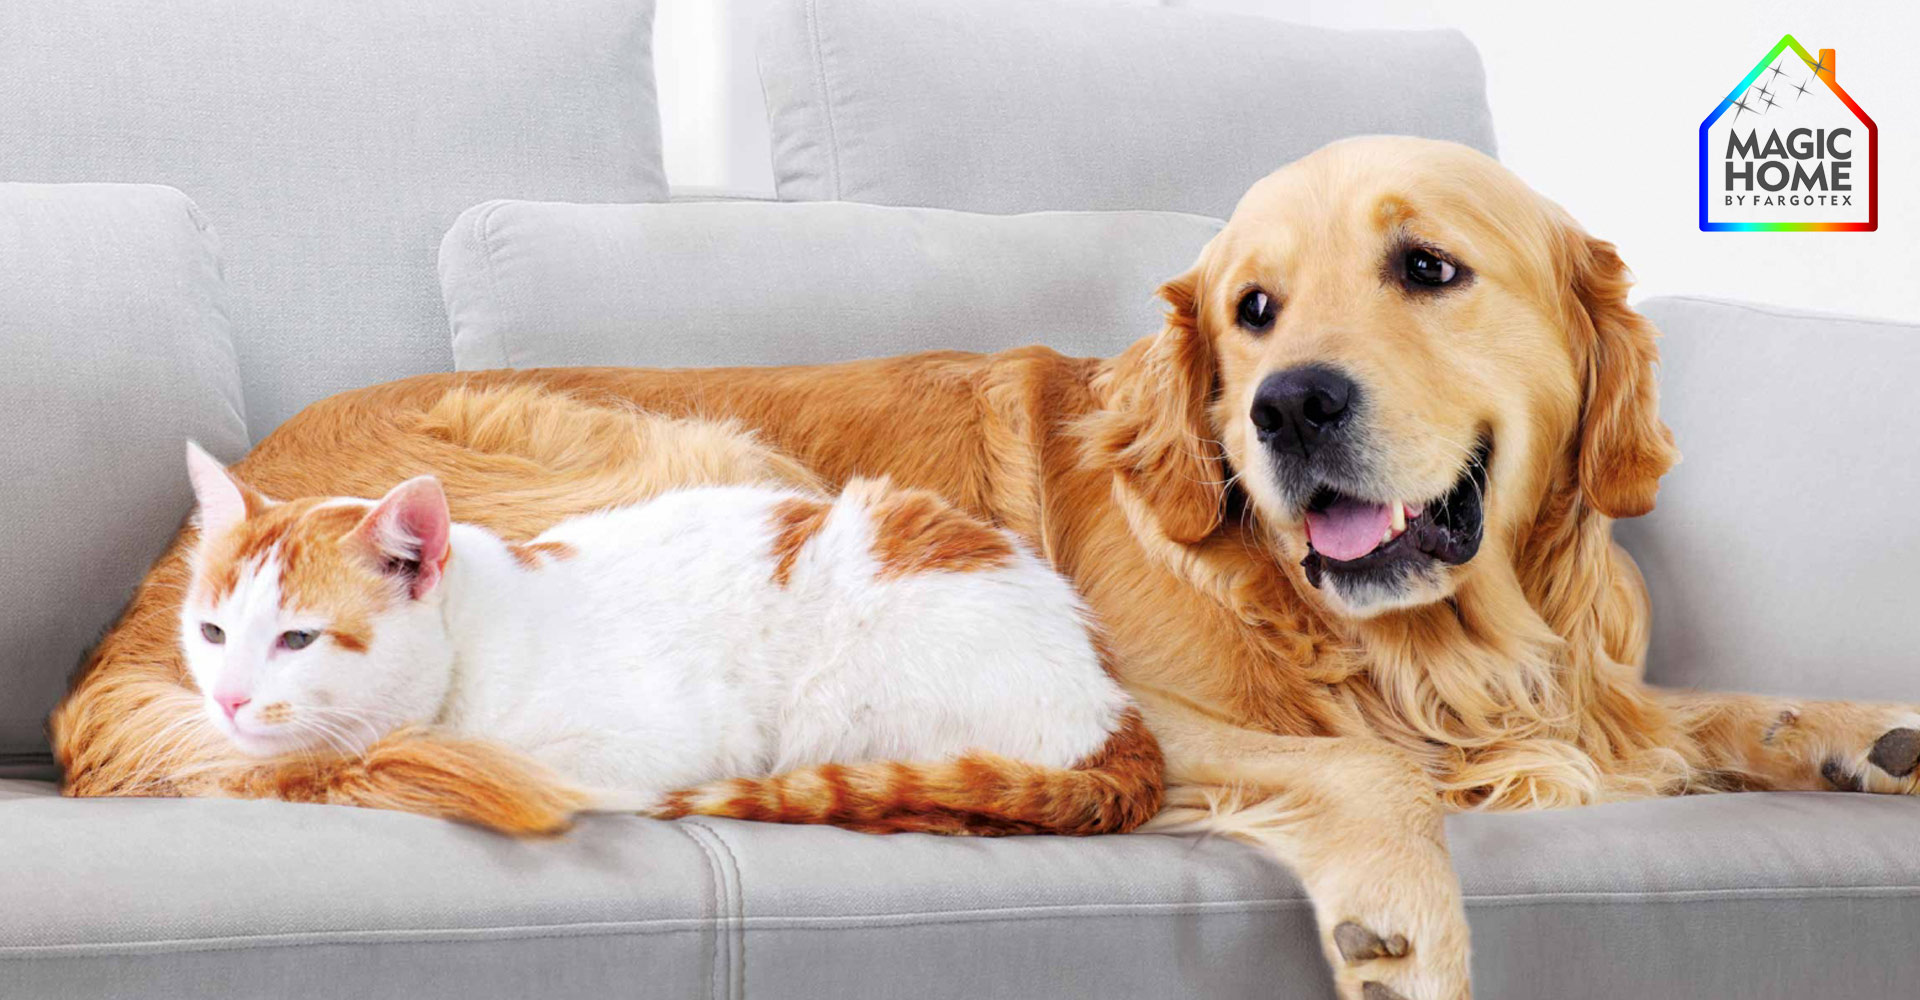 Pet-friendly fabrics for your home. - Online store Smart Furniture Mississauga